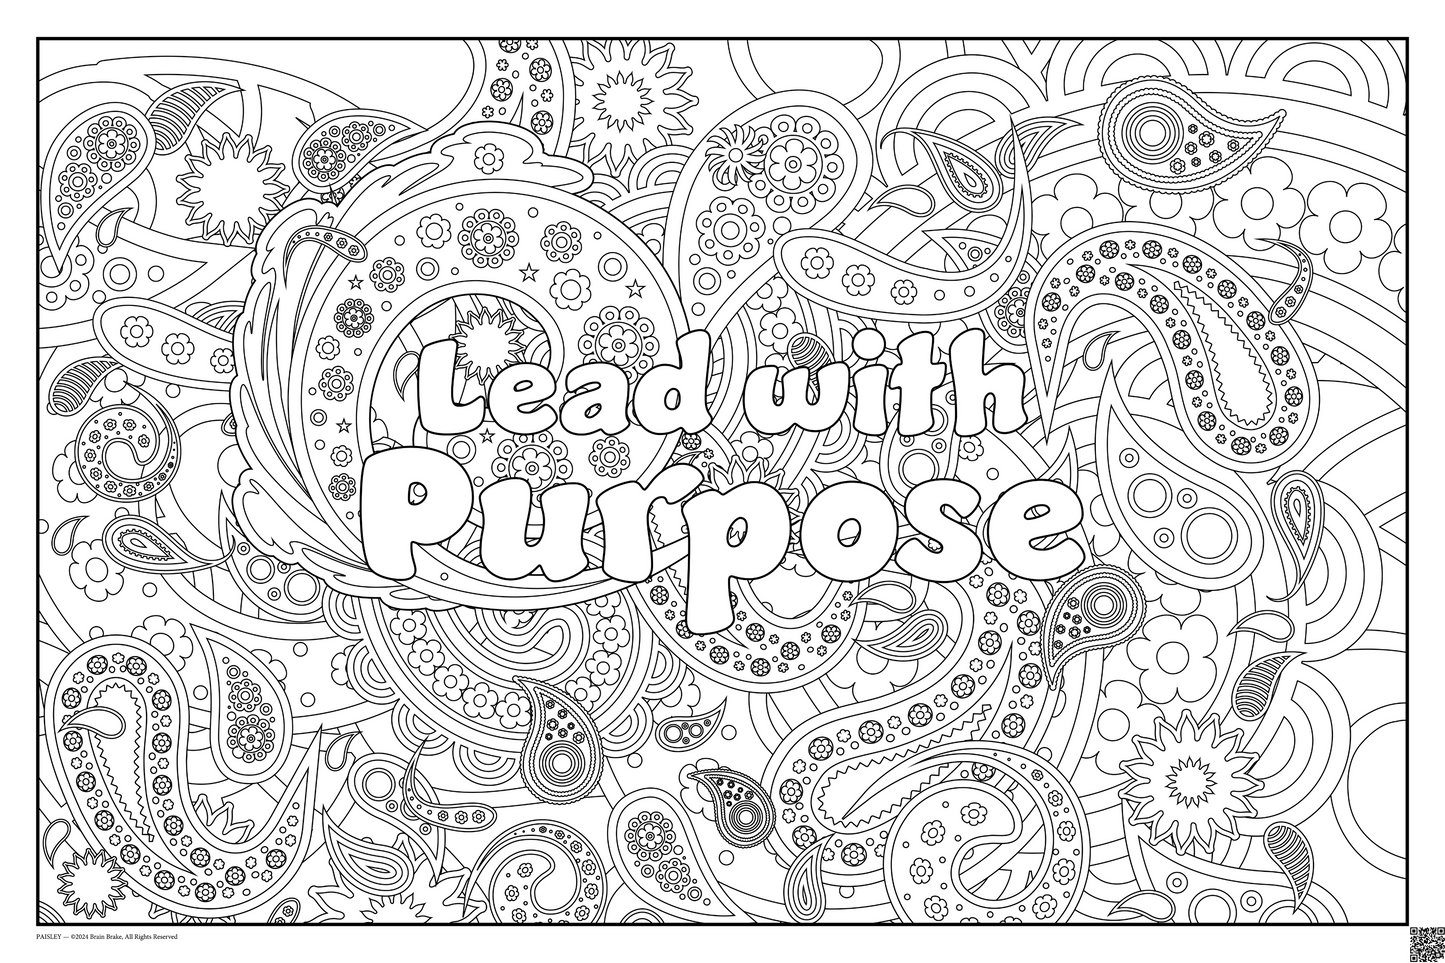 Build Community: Lead with Purpose